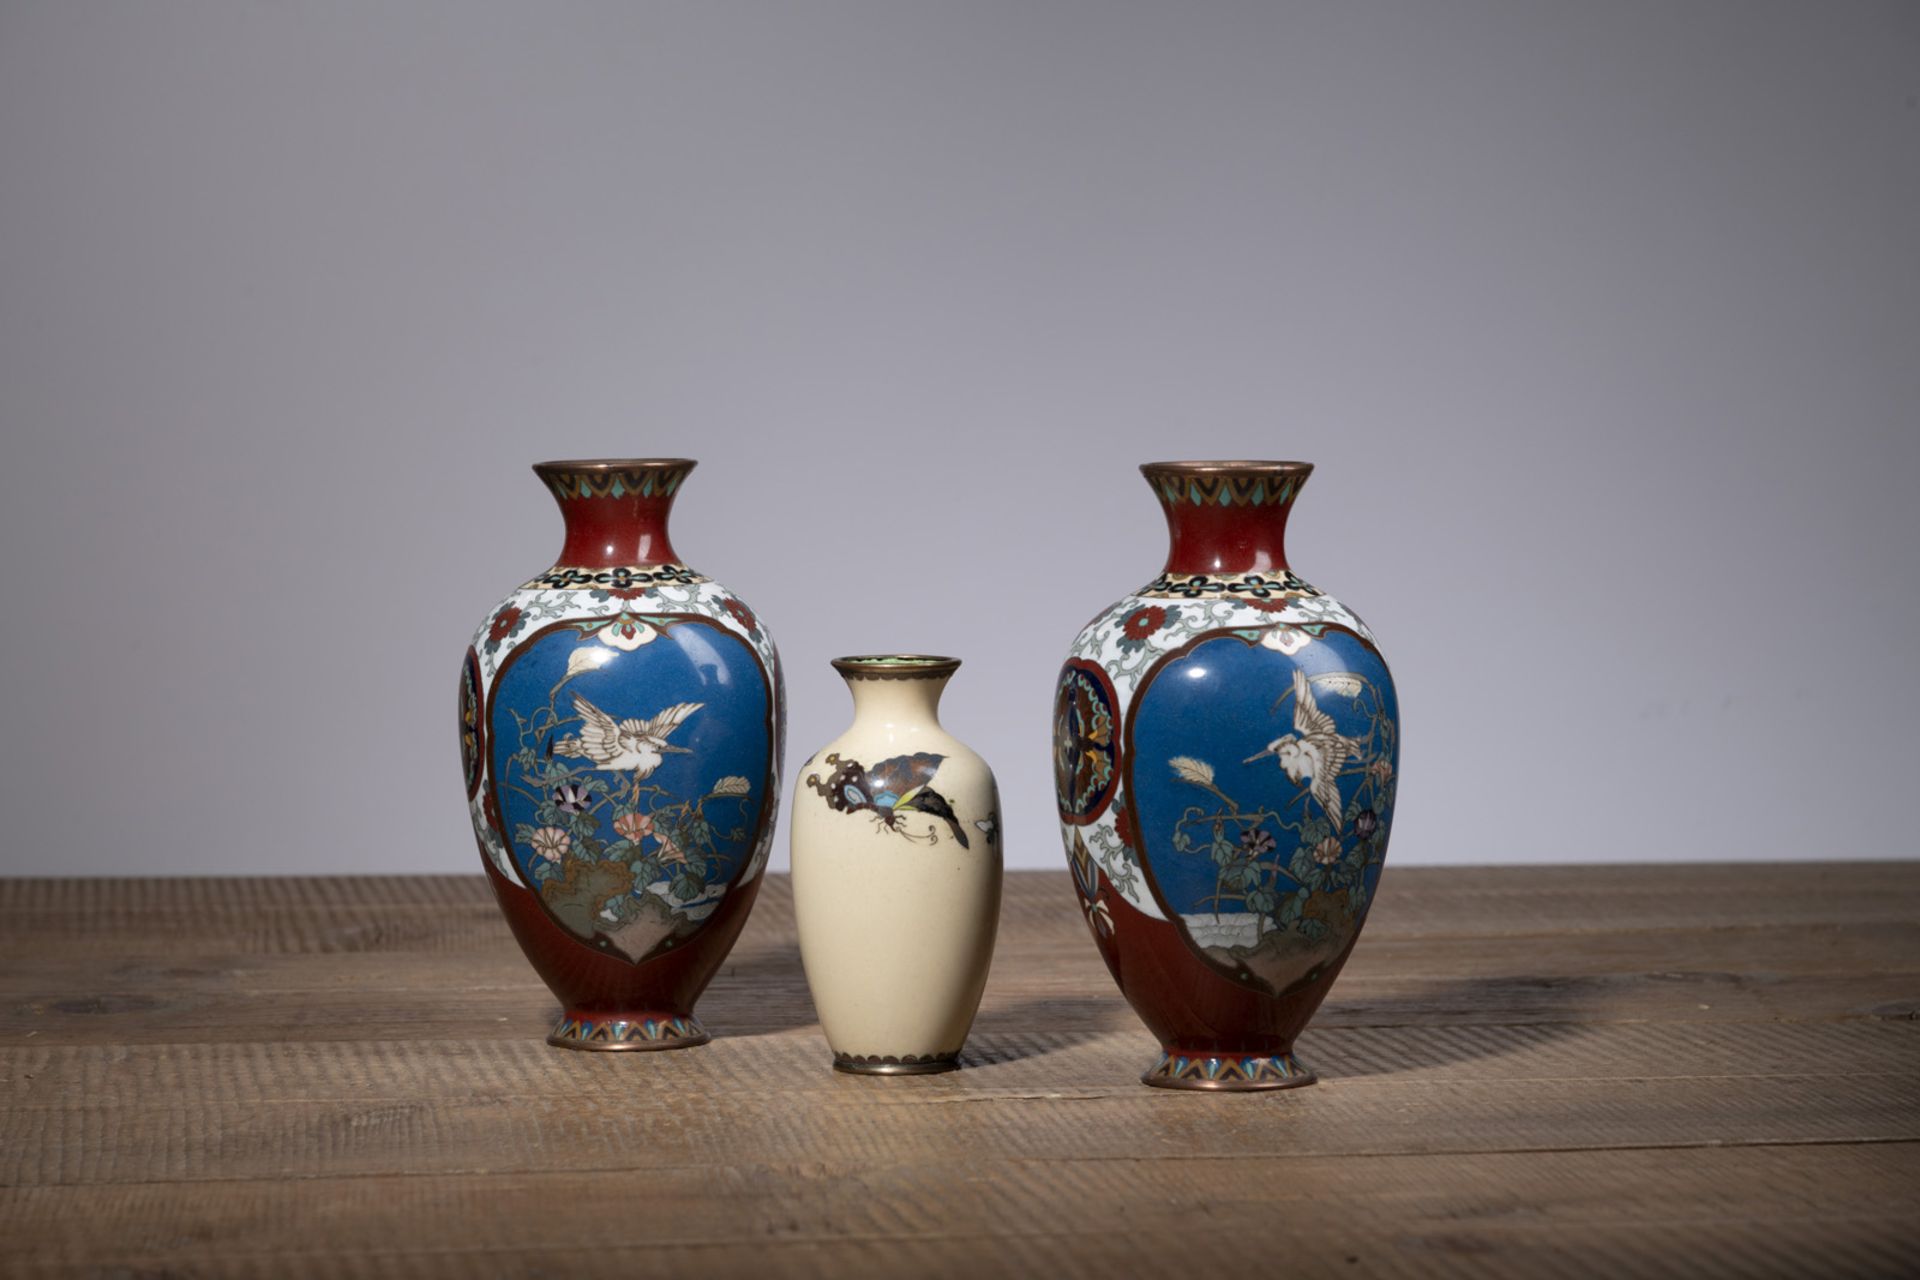 A PAIR OF FLORAL CLOISONNÉ-ENAMEL VASES AND A SMALLER VASE WITH BUTTERFLIES - Image 2 of 4